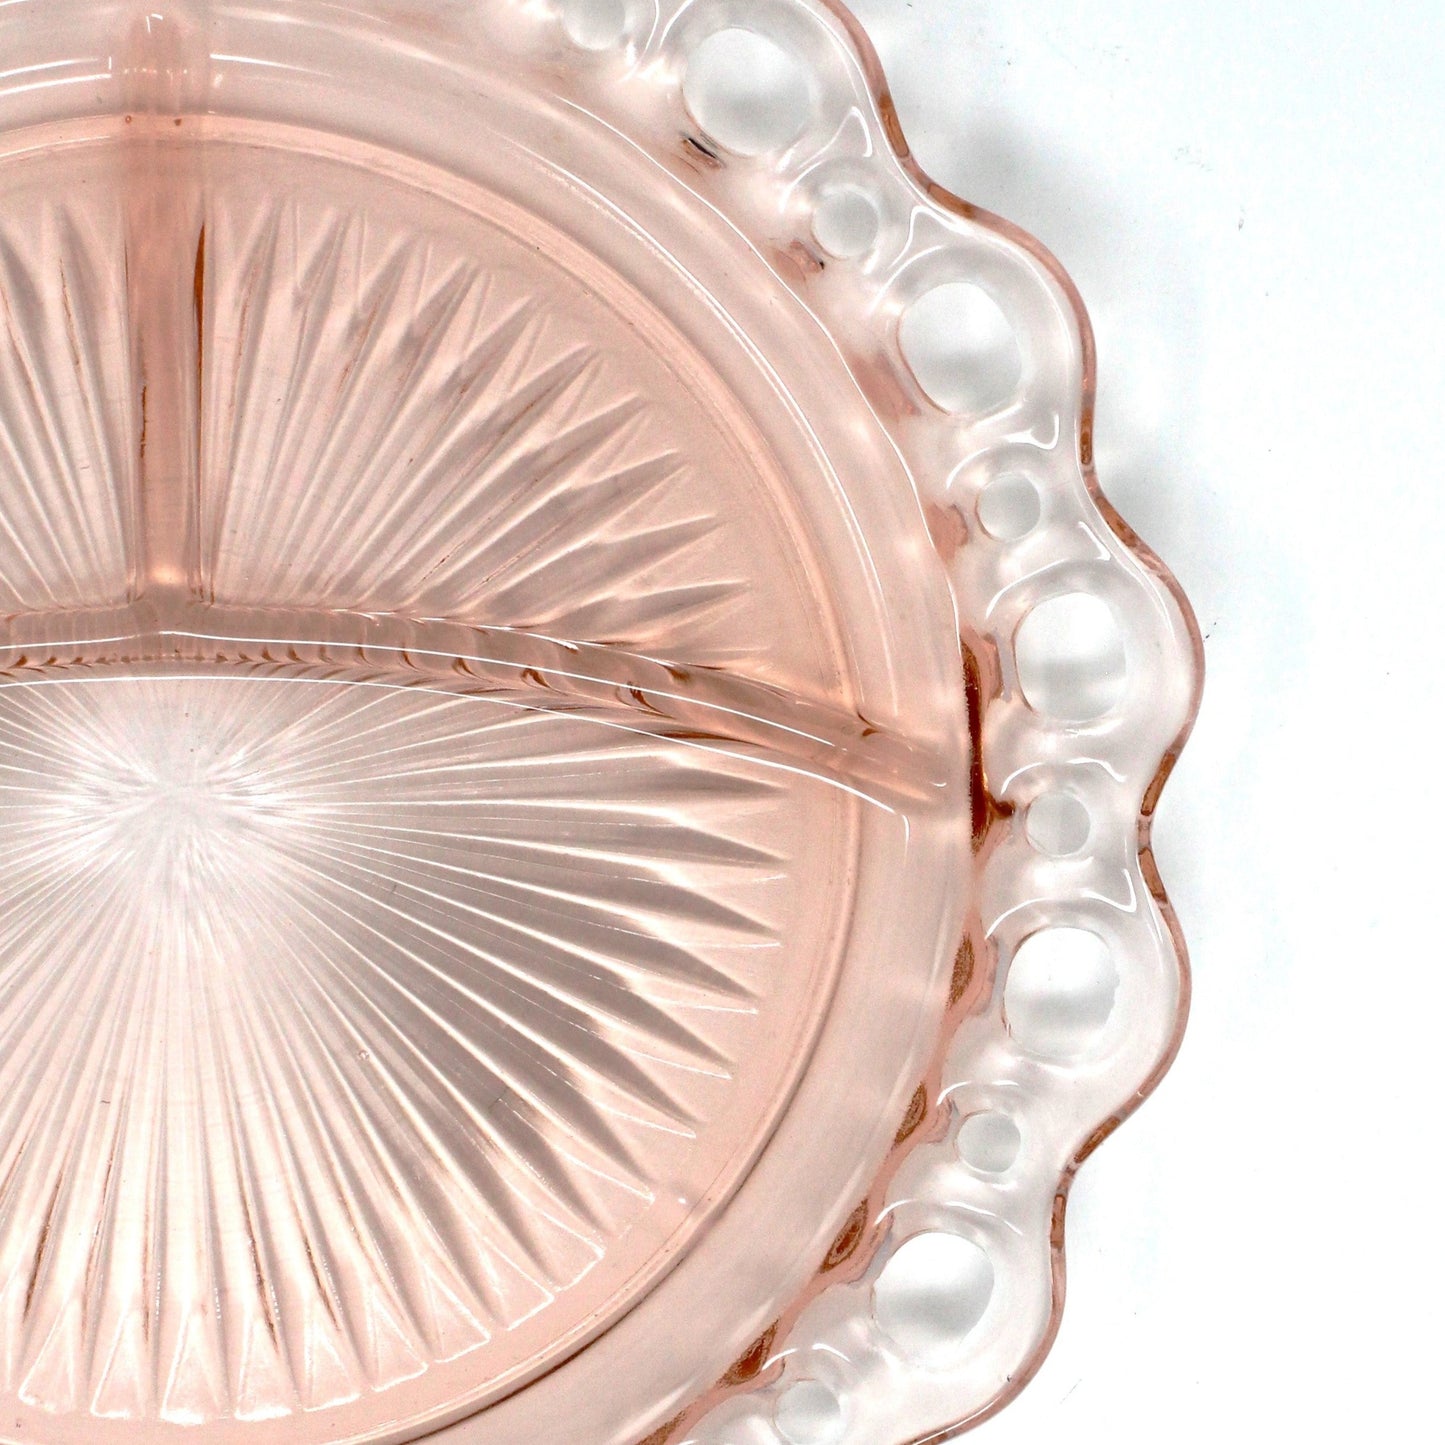 Plate / Grill Plate, Anchor Hocking, Pink Depression Glass, Lace Edge (Old Colony), Vintage